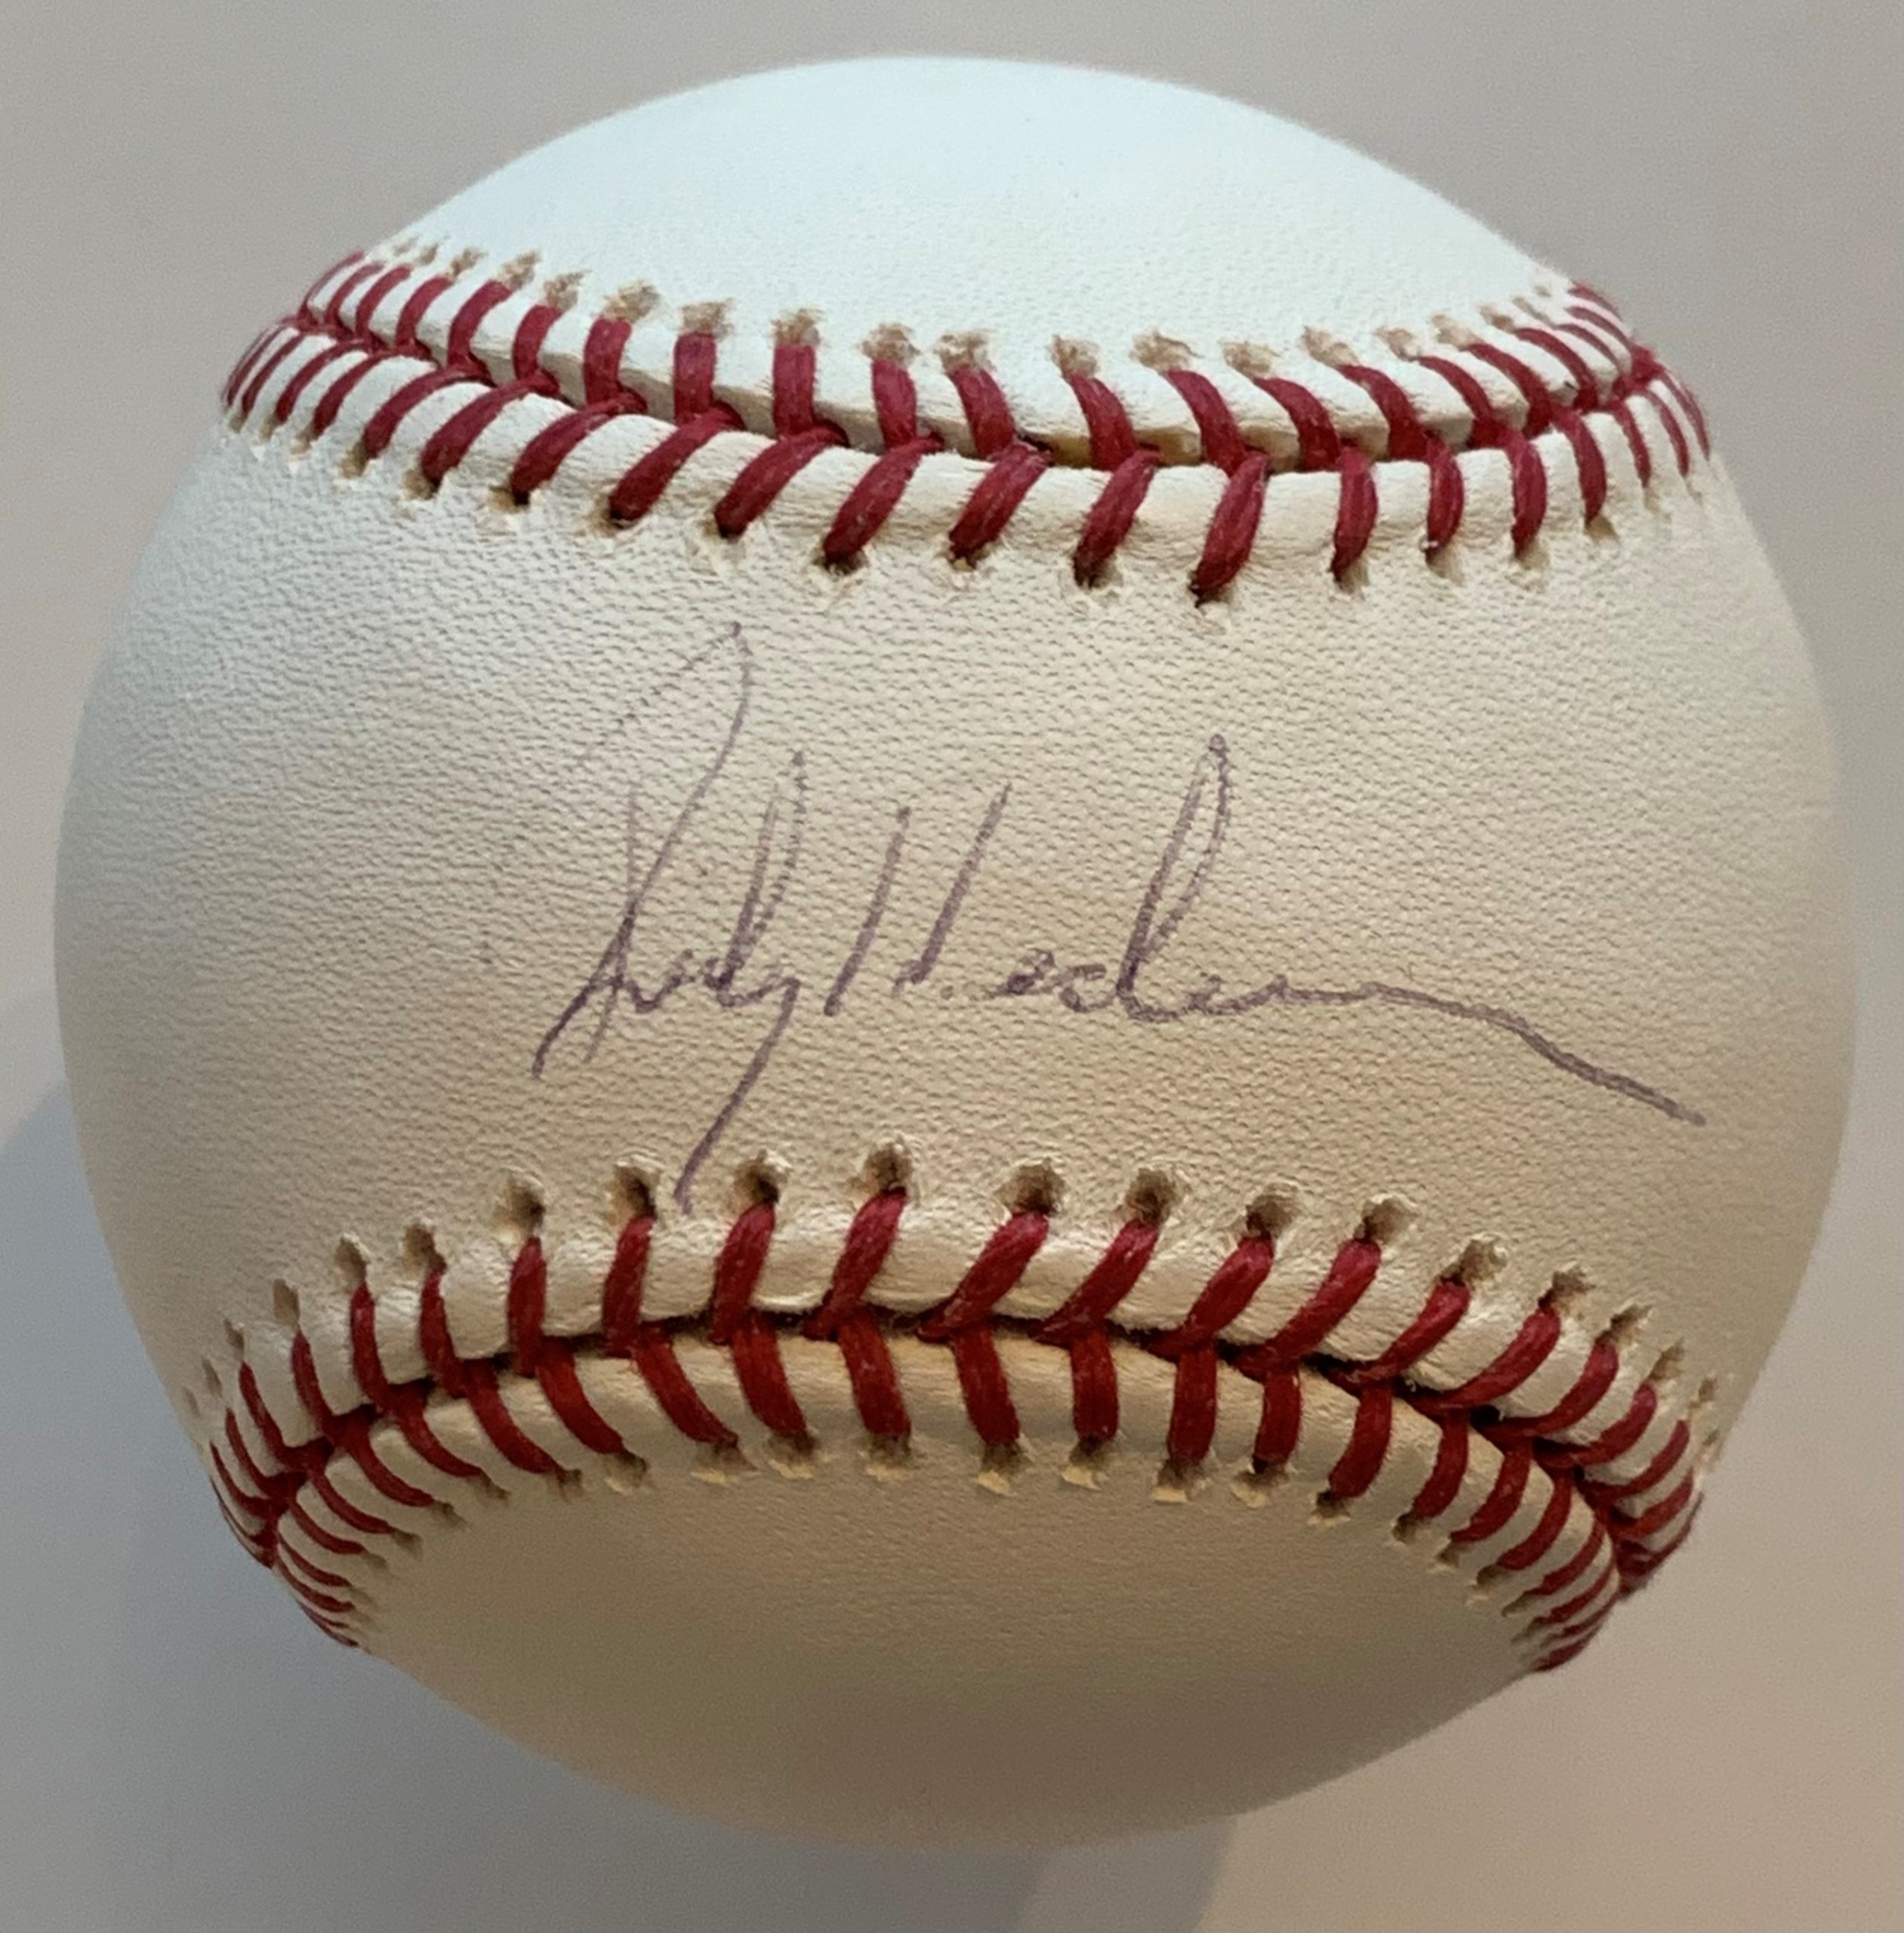 Rickey Henderson Autographed Baseball - The Autograph Source